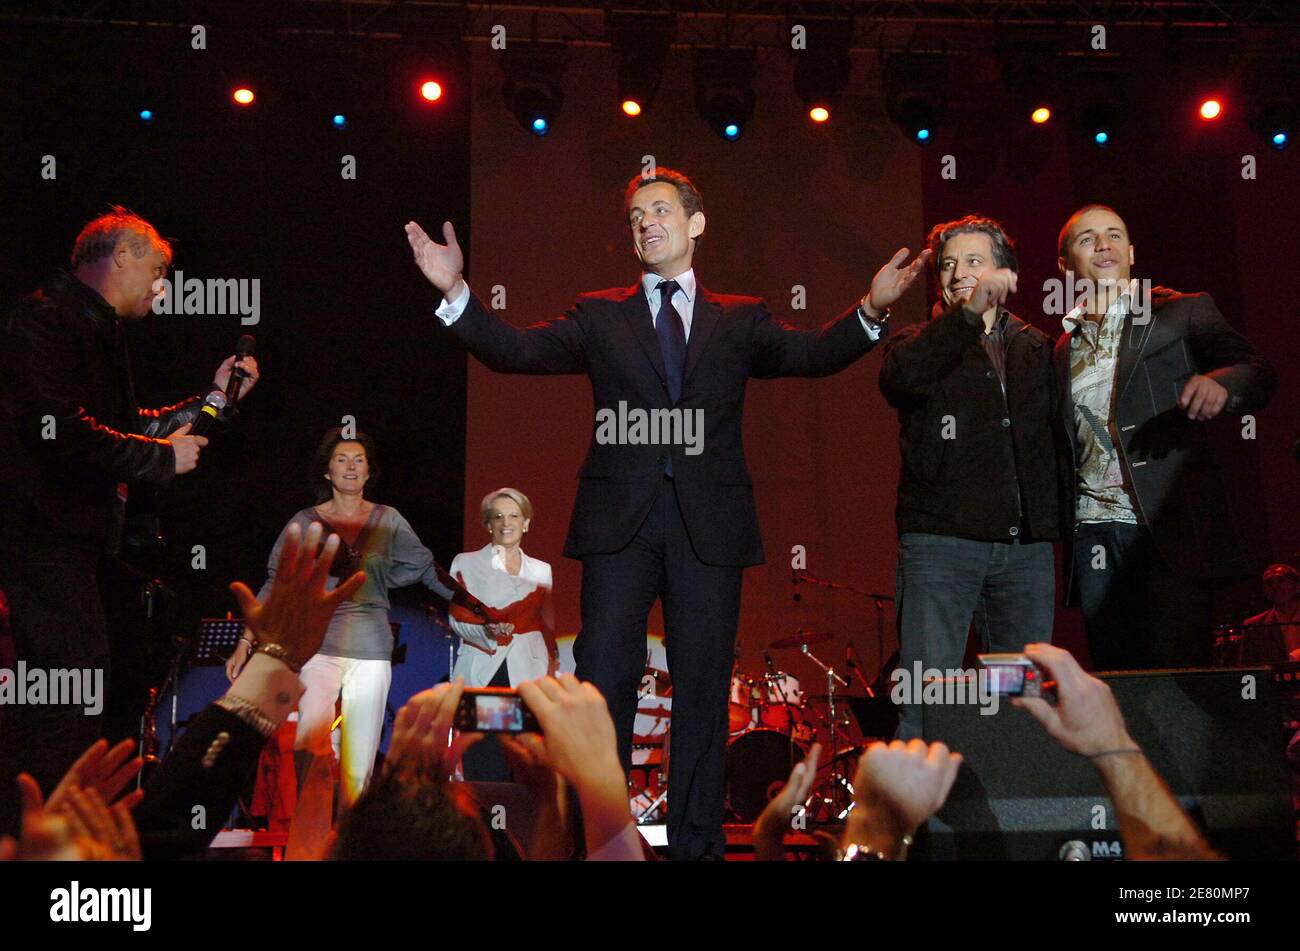 France's newly-elected president Nicolas Sarkozy waves the crowd alongside actor Christian Clavier and singer Faudel, Place de la Concorde in Paris, France, May 6, 2007. French voters elected reform-minded Nicolas Sarkozy as their new president on Sunday, giving him a comfortable winning margin, preliminary official results and projections from four polling agencies showed. With more than half of the vote counted, Sarkozy was scoring just over 53 percent to a little more than 46 percent for Socialist Segolene Royal. Polling agencies also had the conservative Sarkozy winning 53 percent of the v Stock Photo